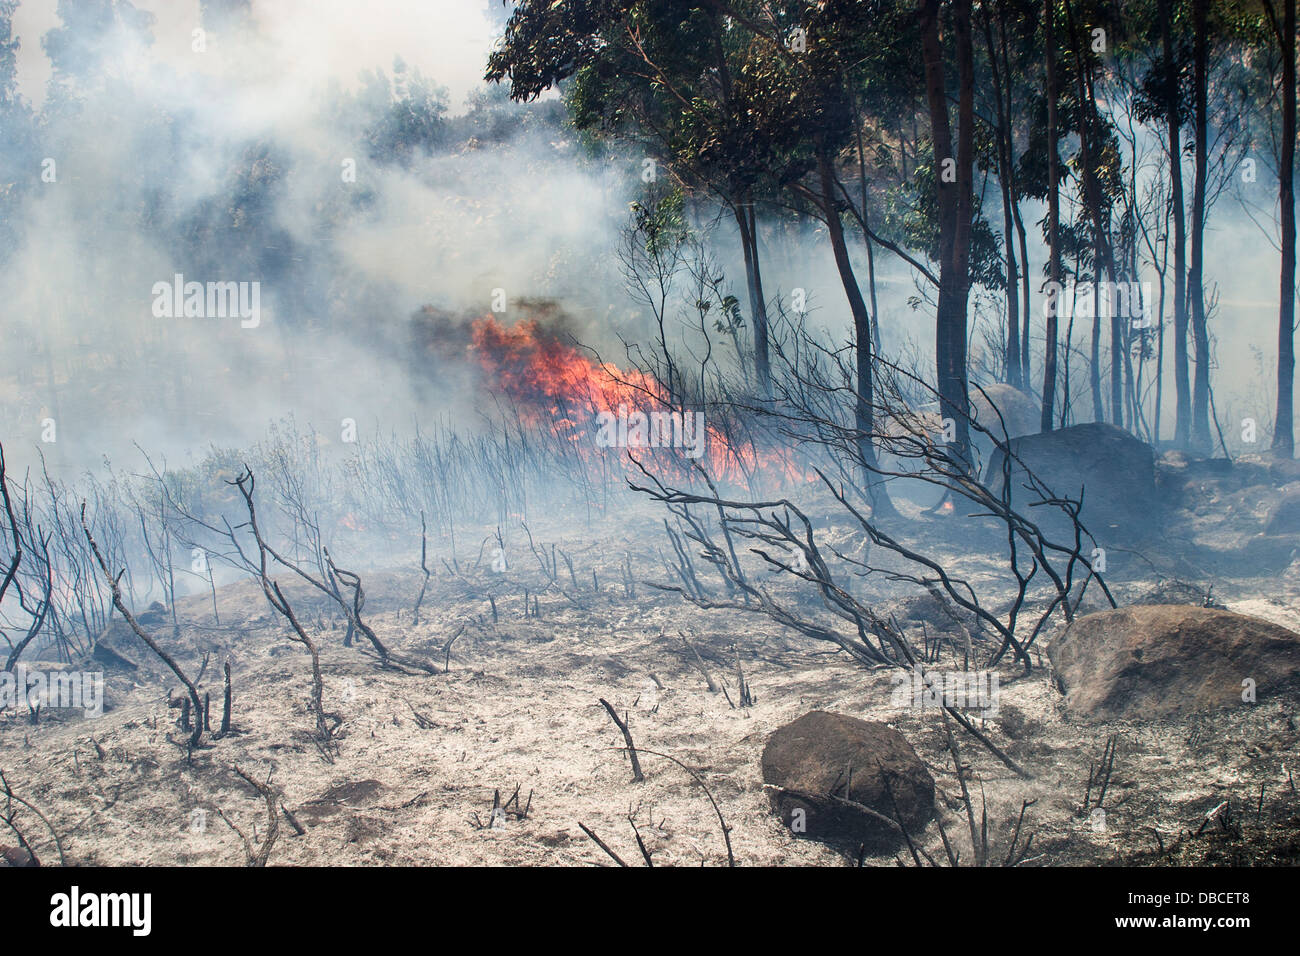 Continental summer hot weather and drought: Forest fire raging with huge flames in dry woodland during a seasonal heatwave in The Algarve, Portugal Stock Photo